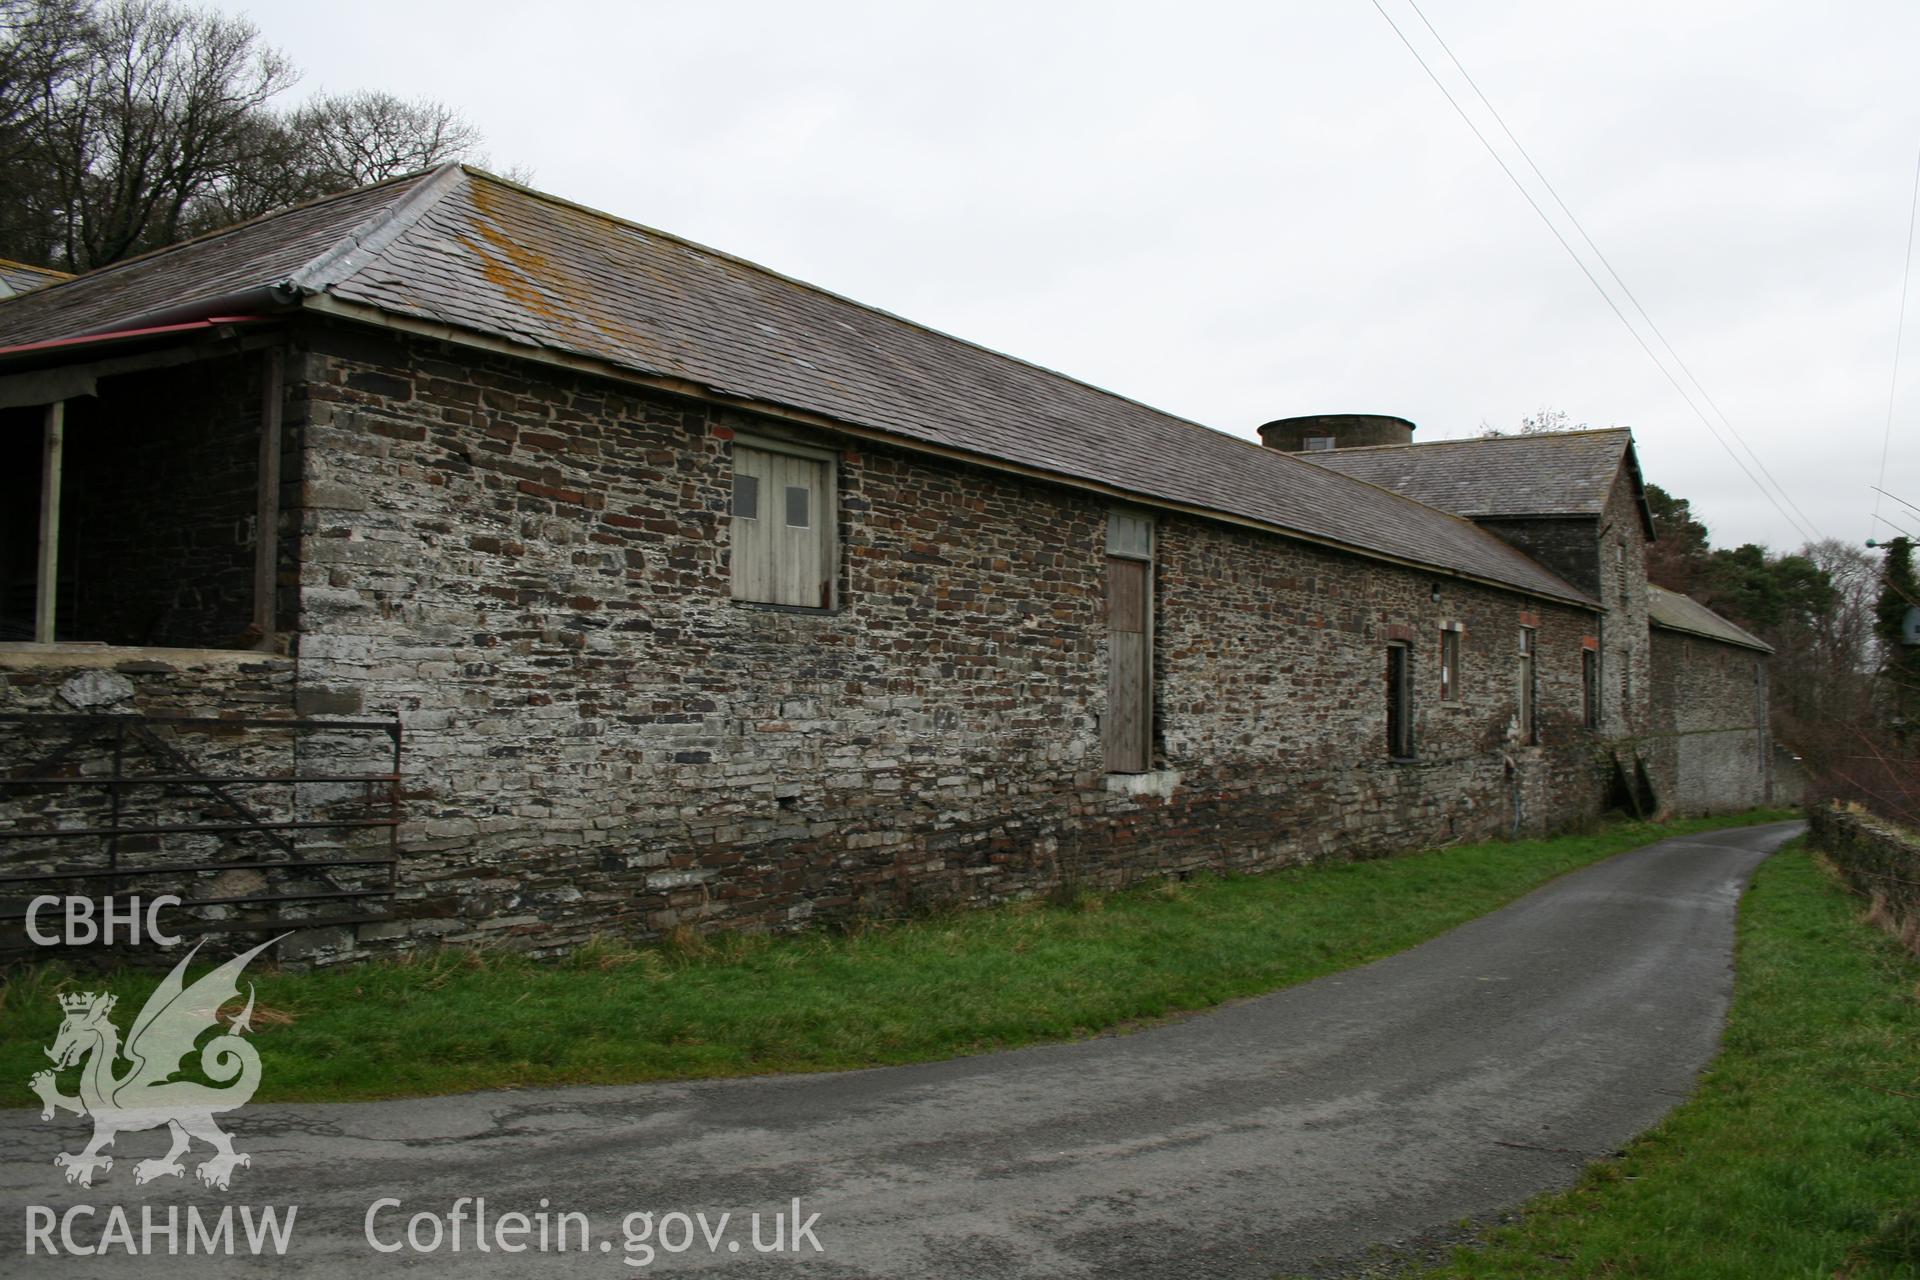 Exterior view of cattle shelter. Photographic survey of the exterior of the farm buildings at Tan-y-Graig Farm, Llanfarian, Aberystwyth. Conducted by Geoff Ward and John Wiles, 11th December 2006.